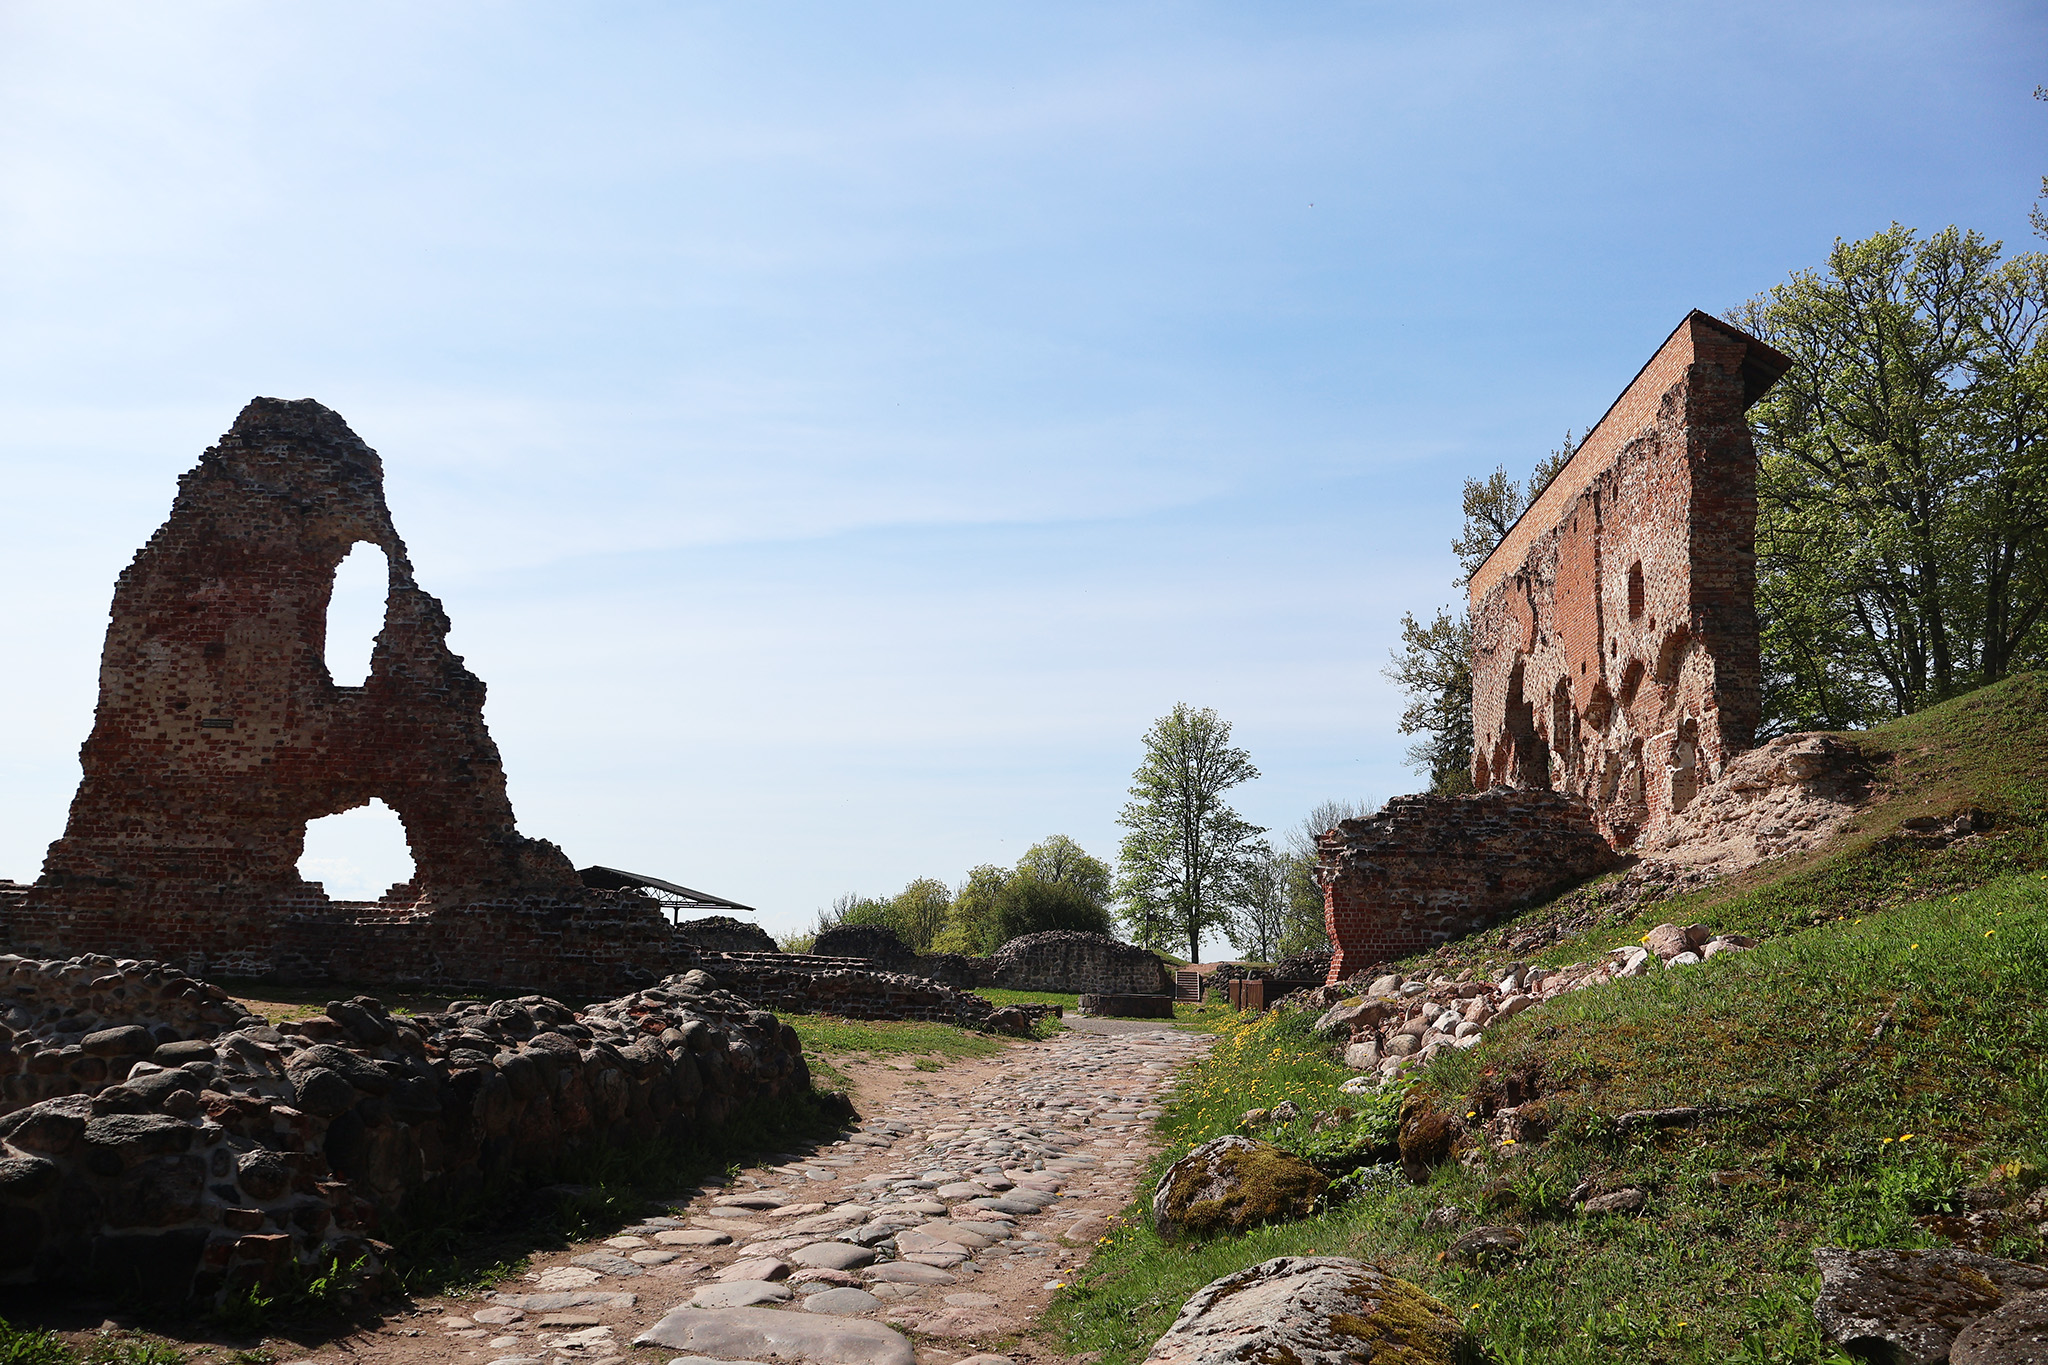 Valjandi: Picturesque and Teutonic Remains